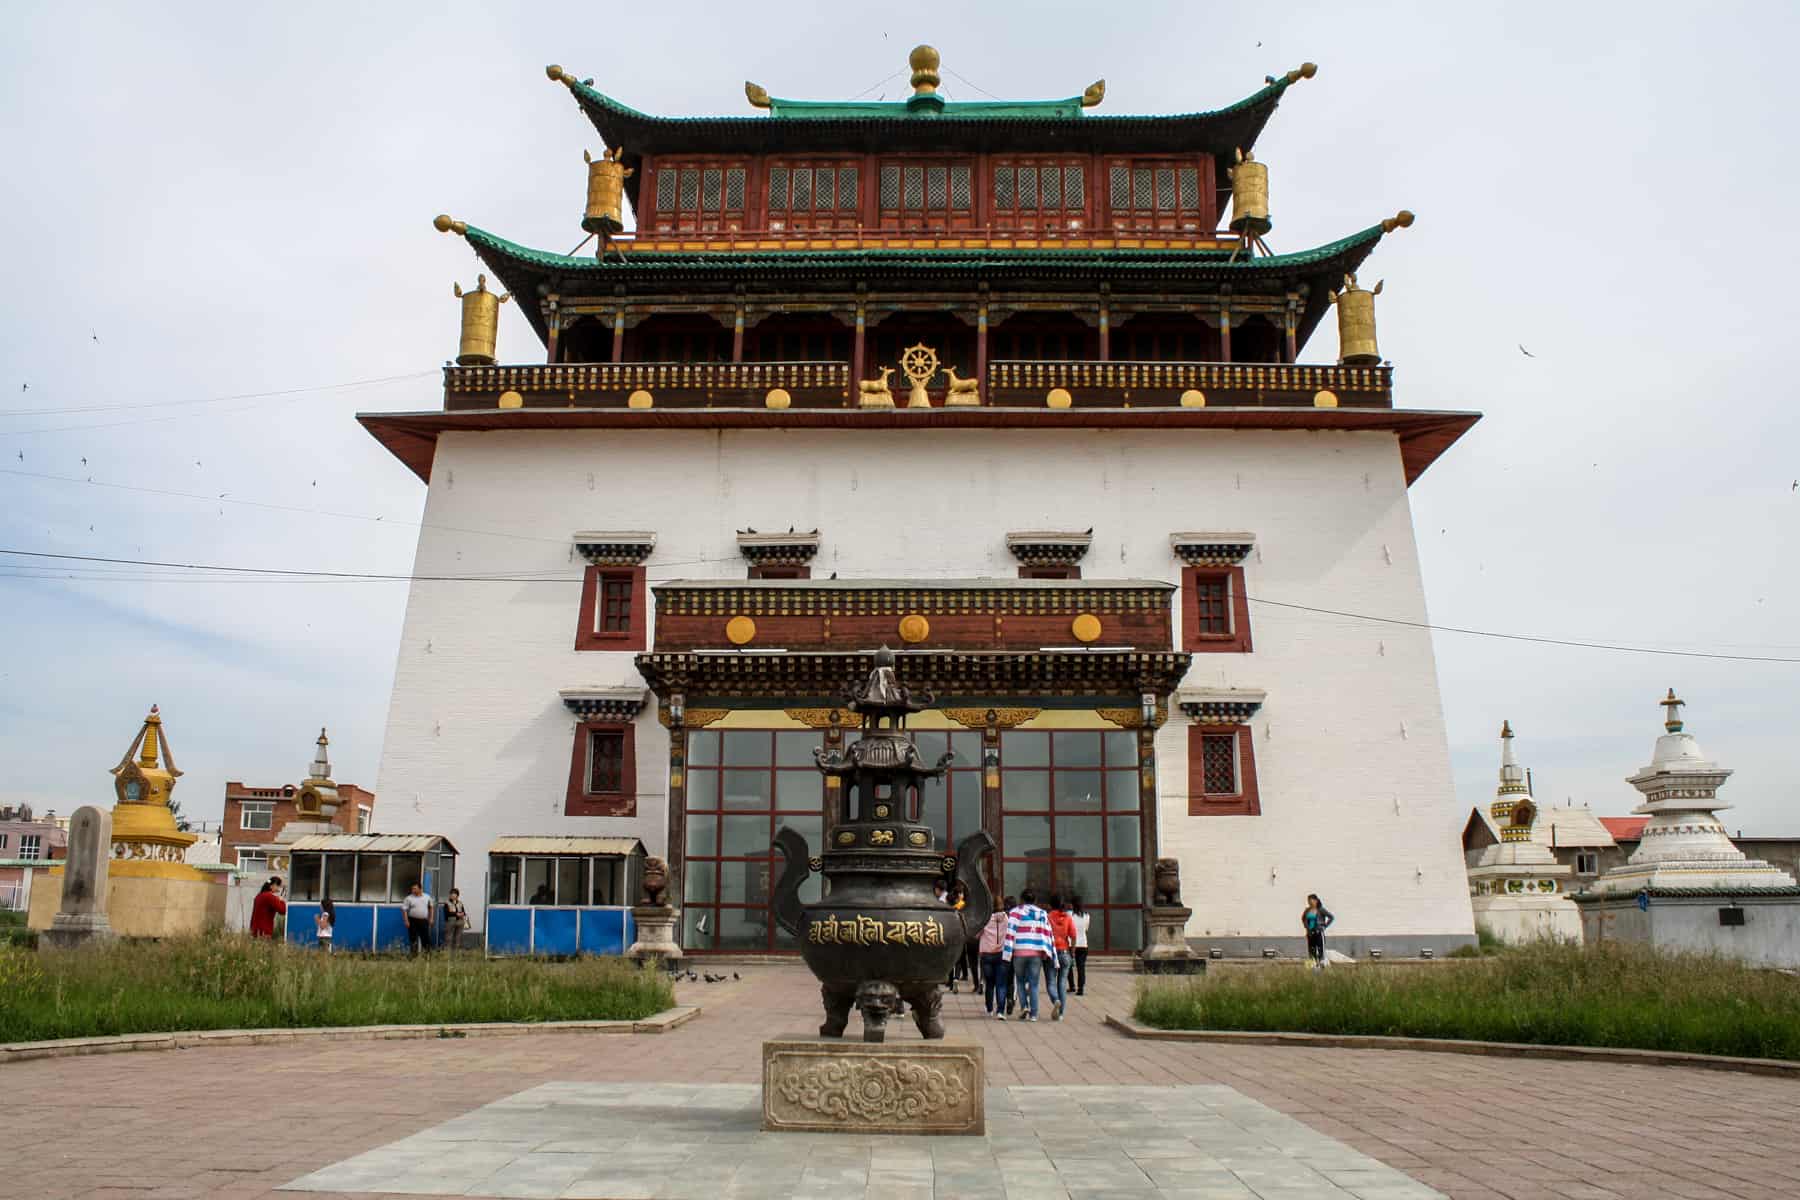 The red and gold roofed white temple building of the Gandan Monastery in Ulaanbaatar, Mongolia